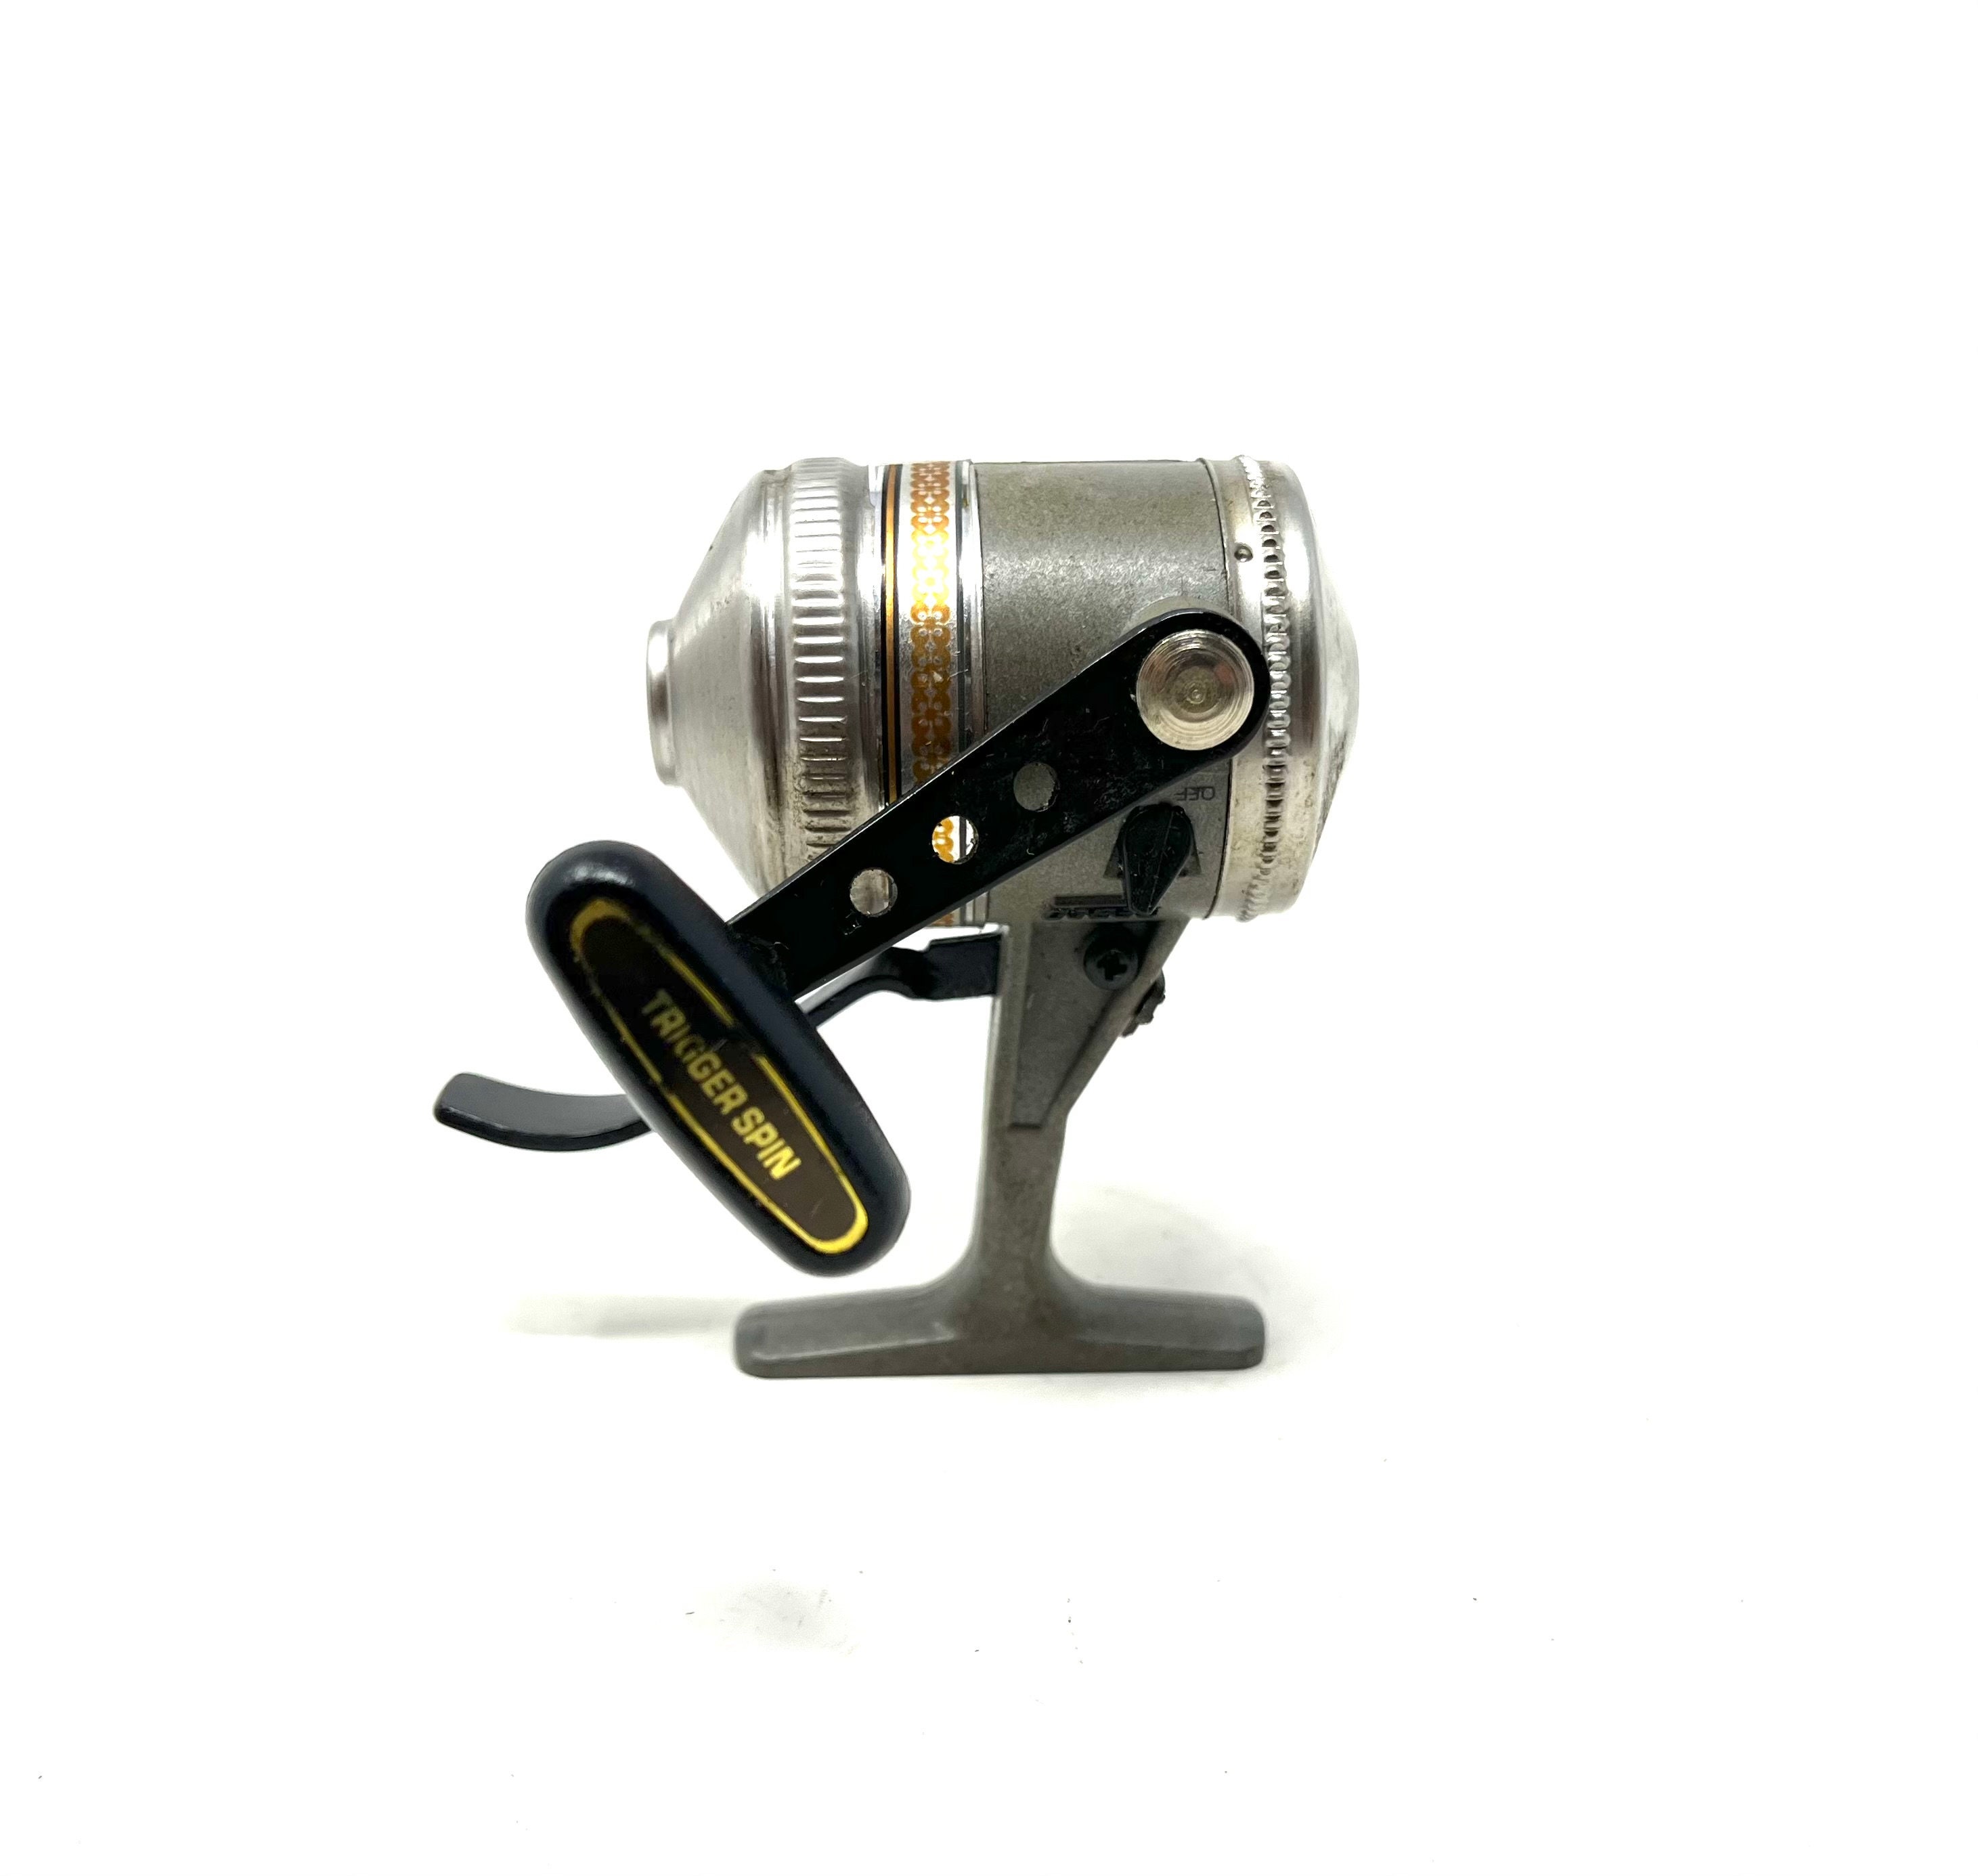 VINTAGE SHIMANO AX200 Spinning Reel made in Japan w/ Box & Papers